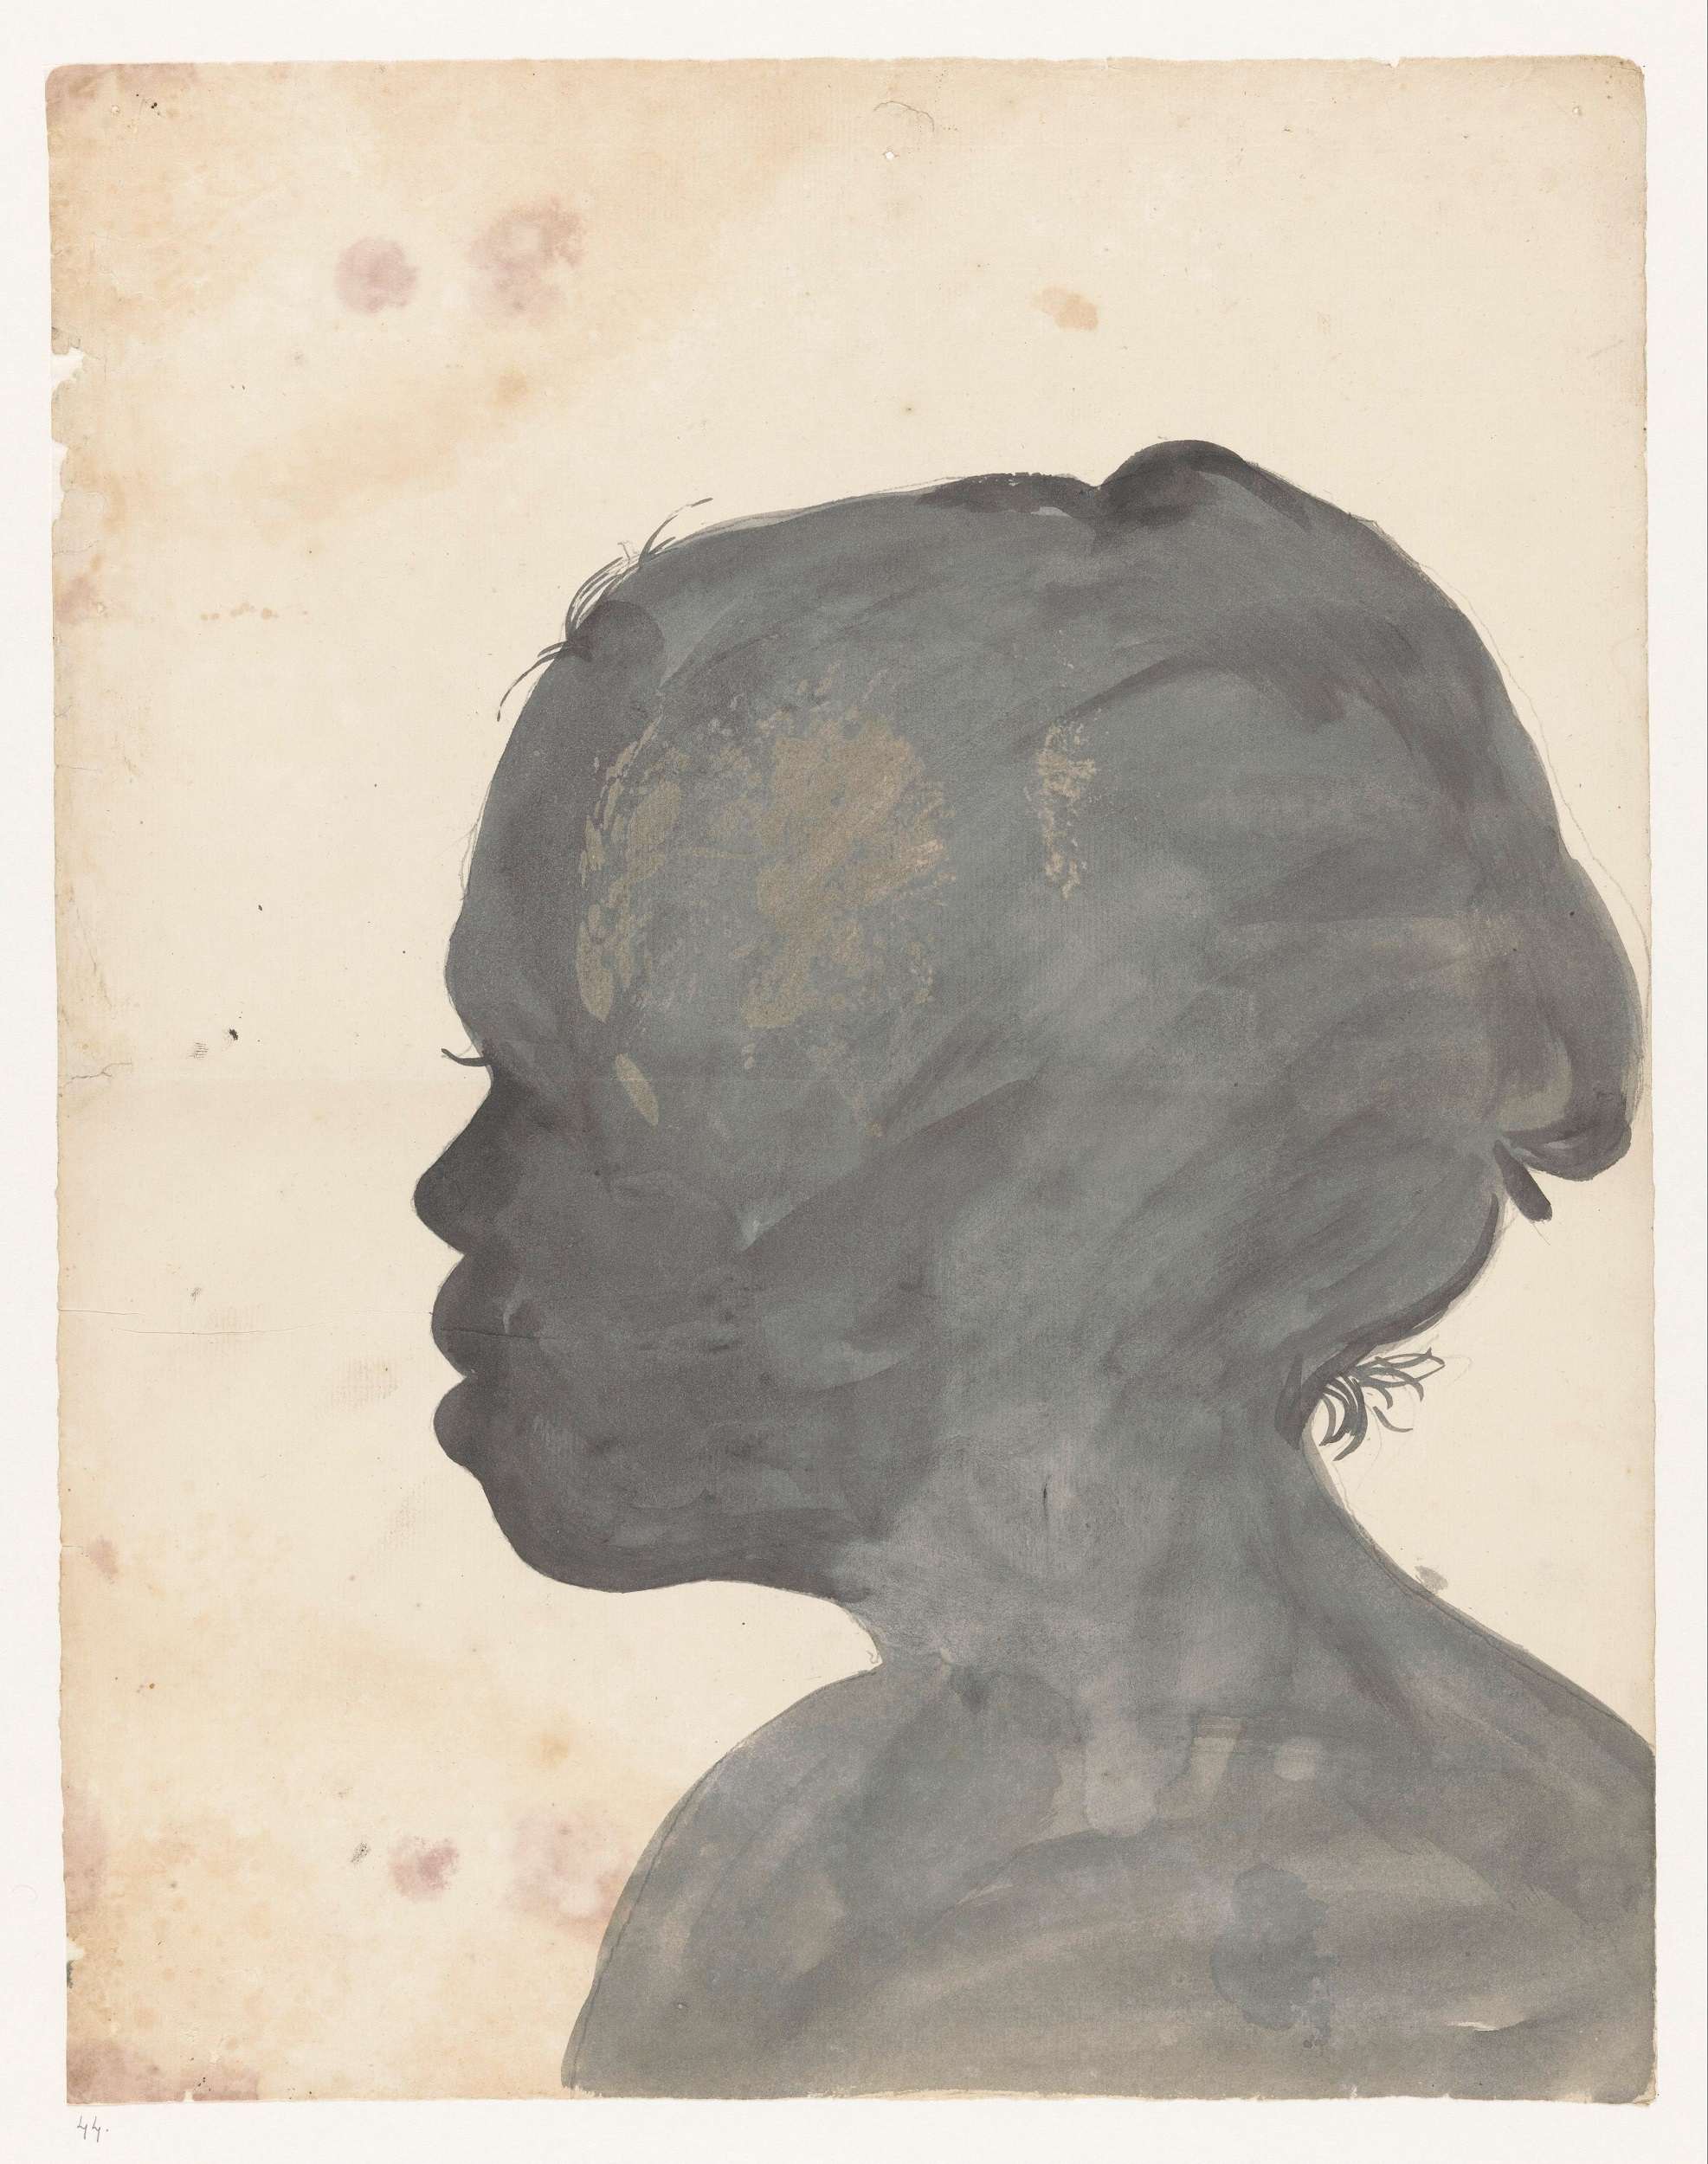 Painted silhouette of a non-European woman facing left